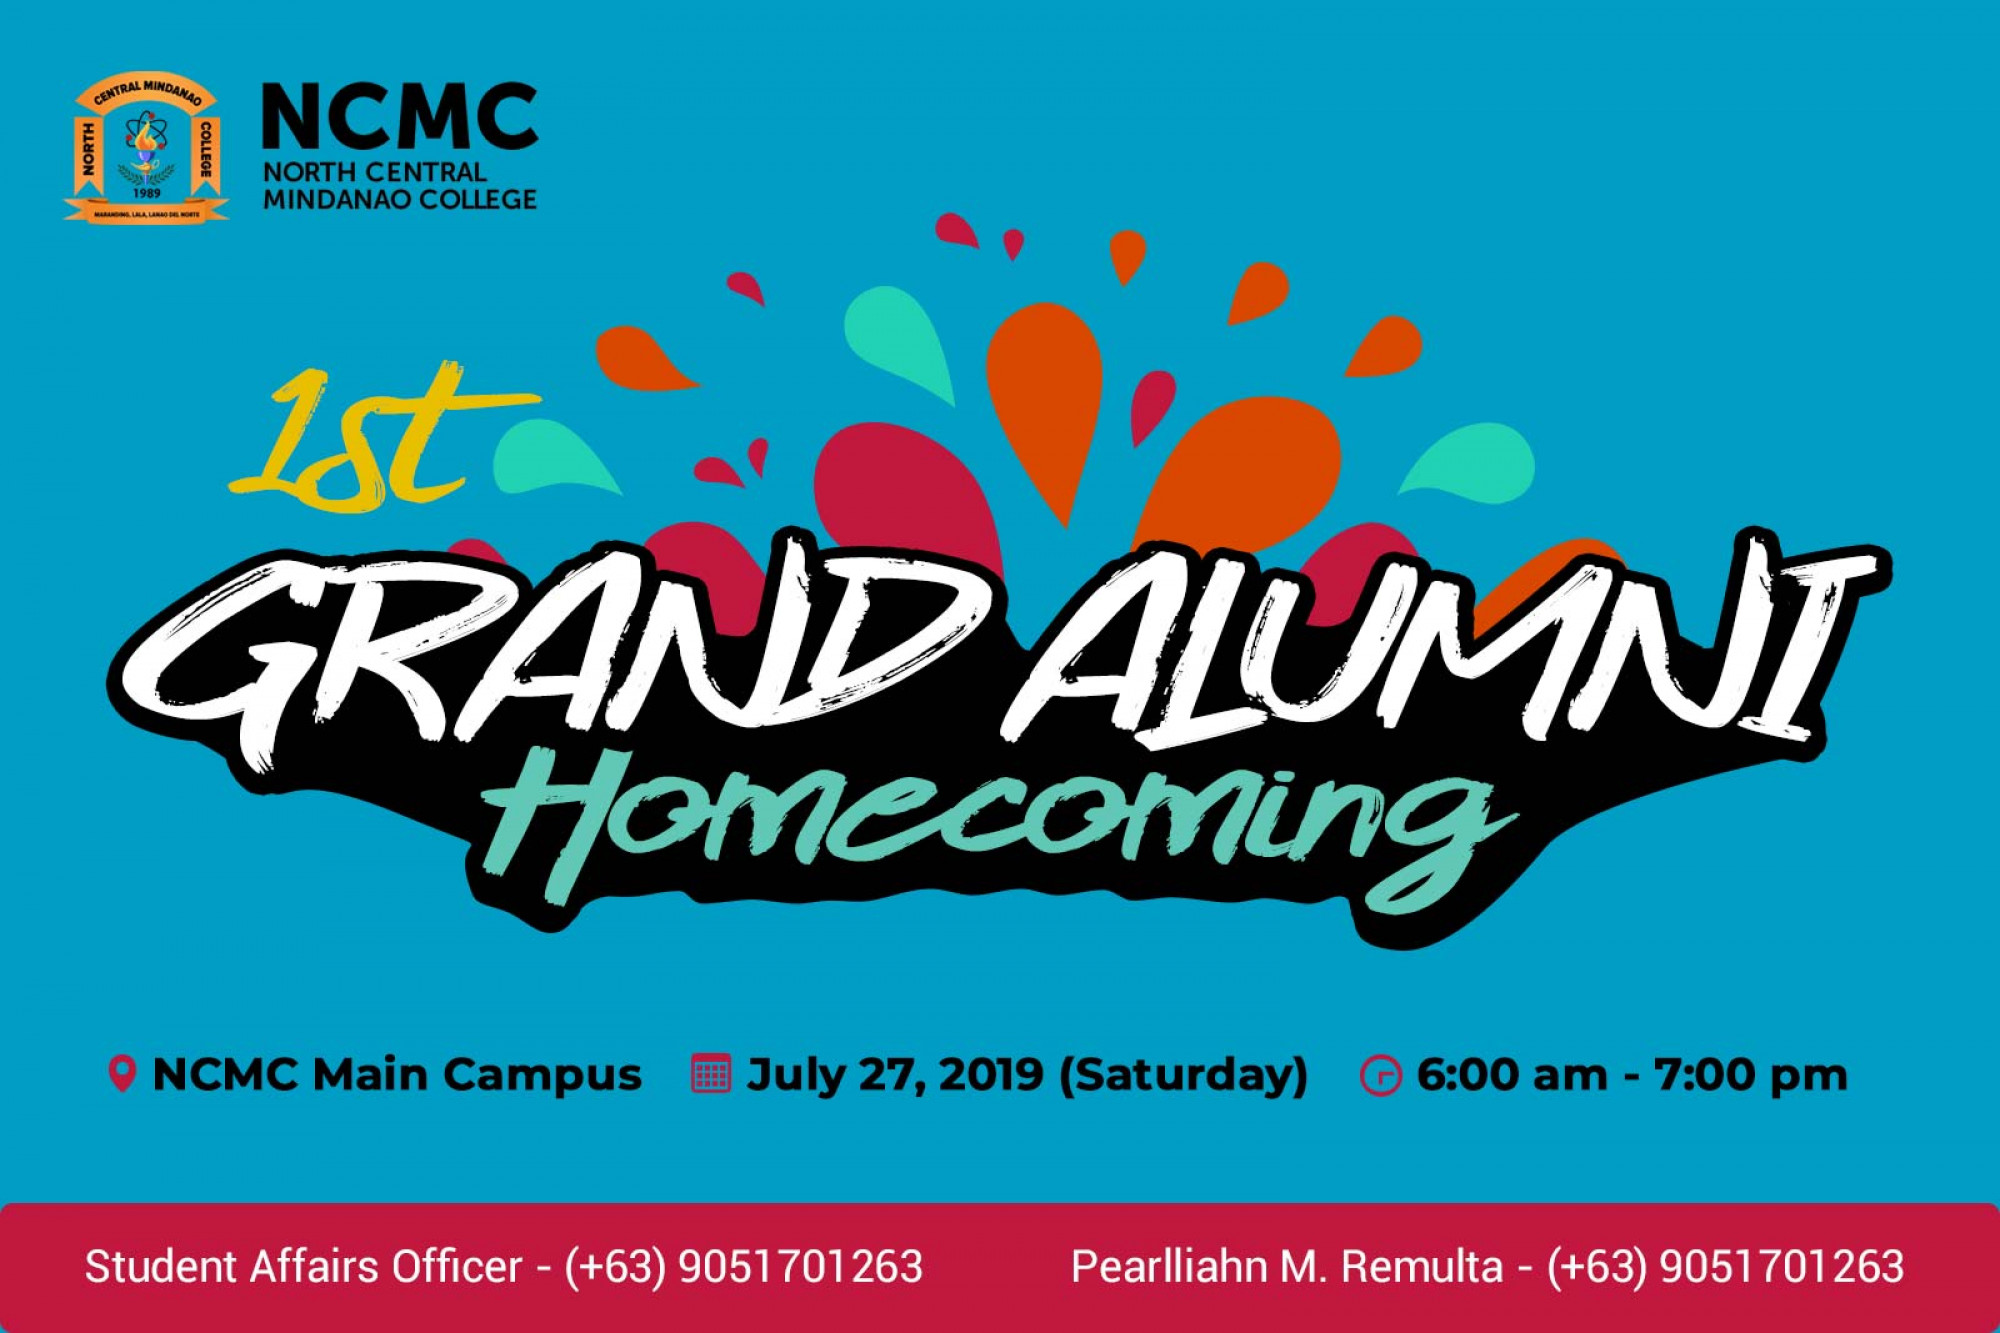 First Grand Alumni Homecoming 2019 - North Central Mindanao College